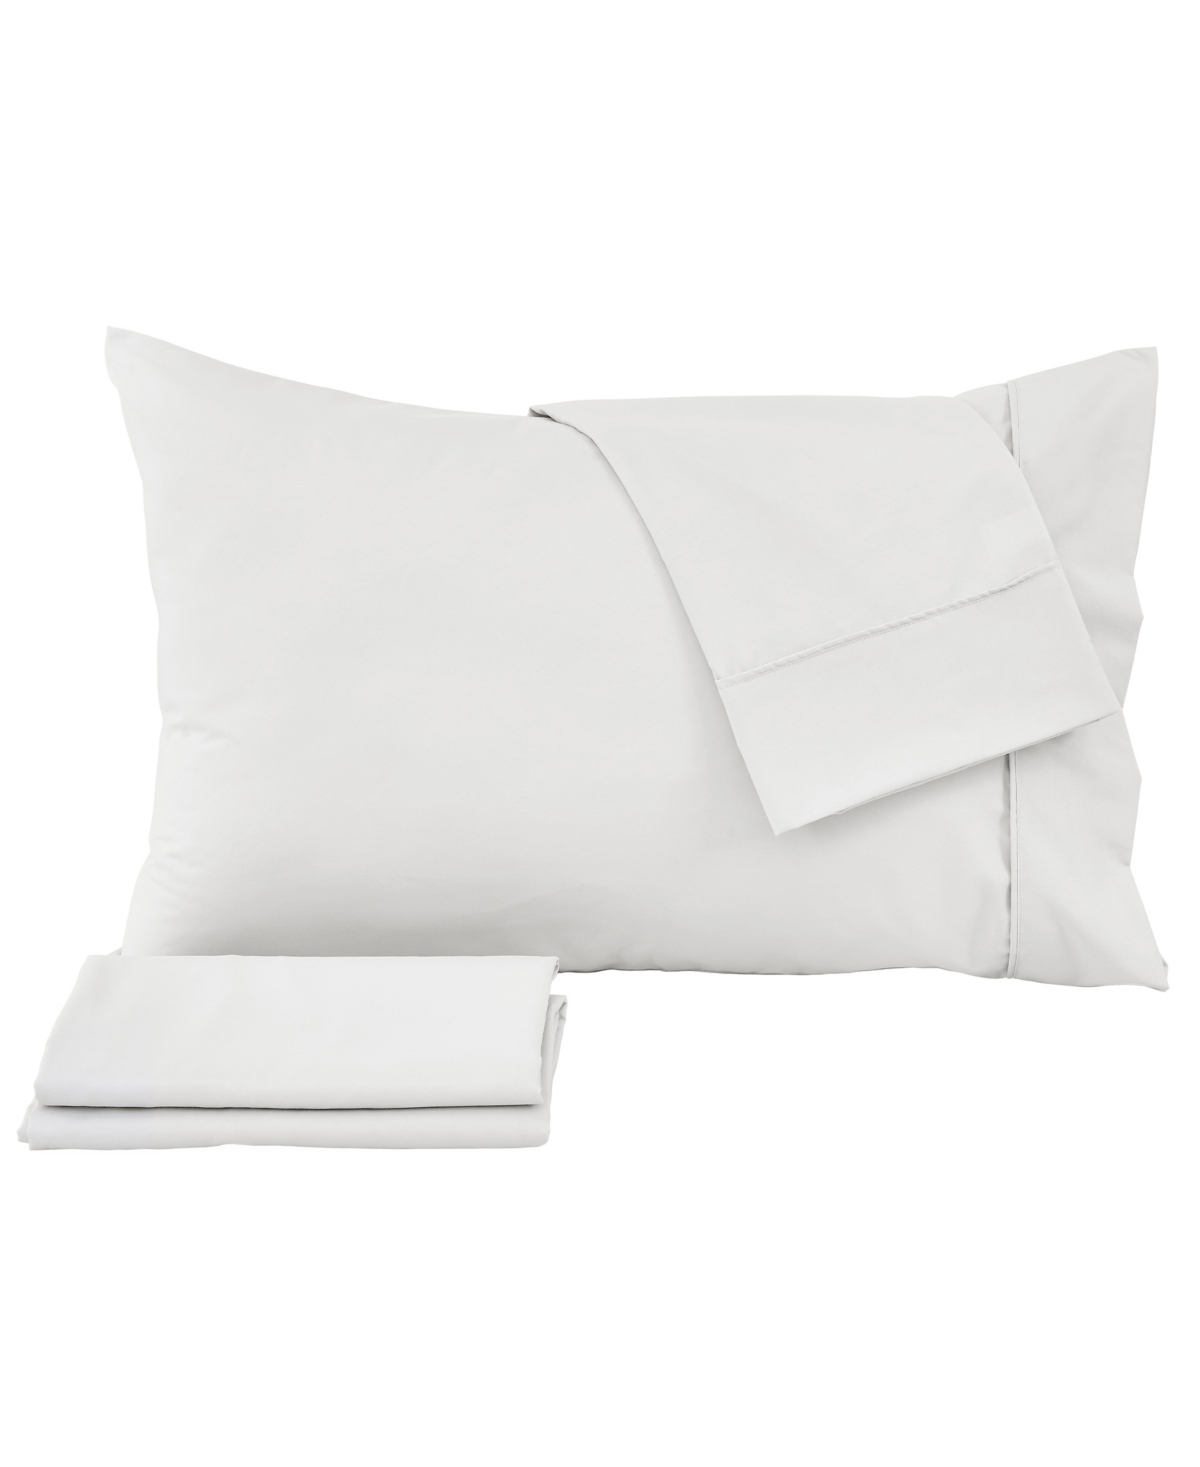 Premium Comforts Solid Microfiber Ultra Soft 4 Piece Sheet Set, King In White